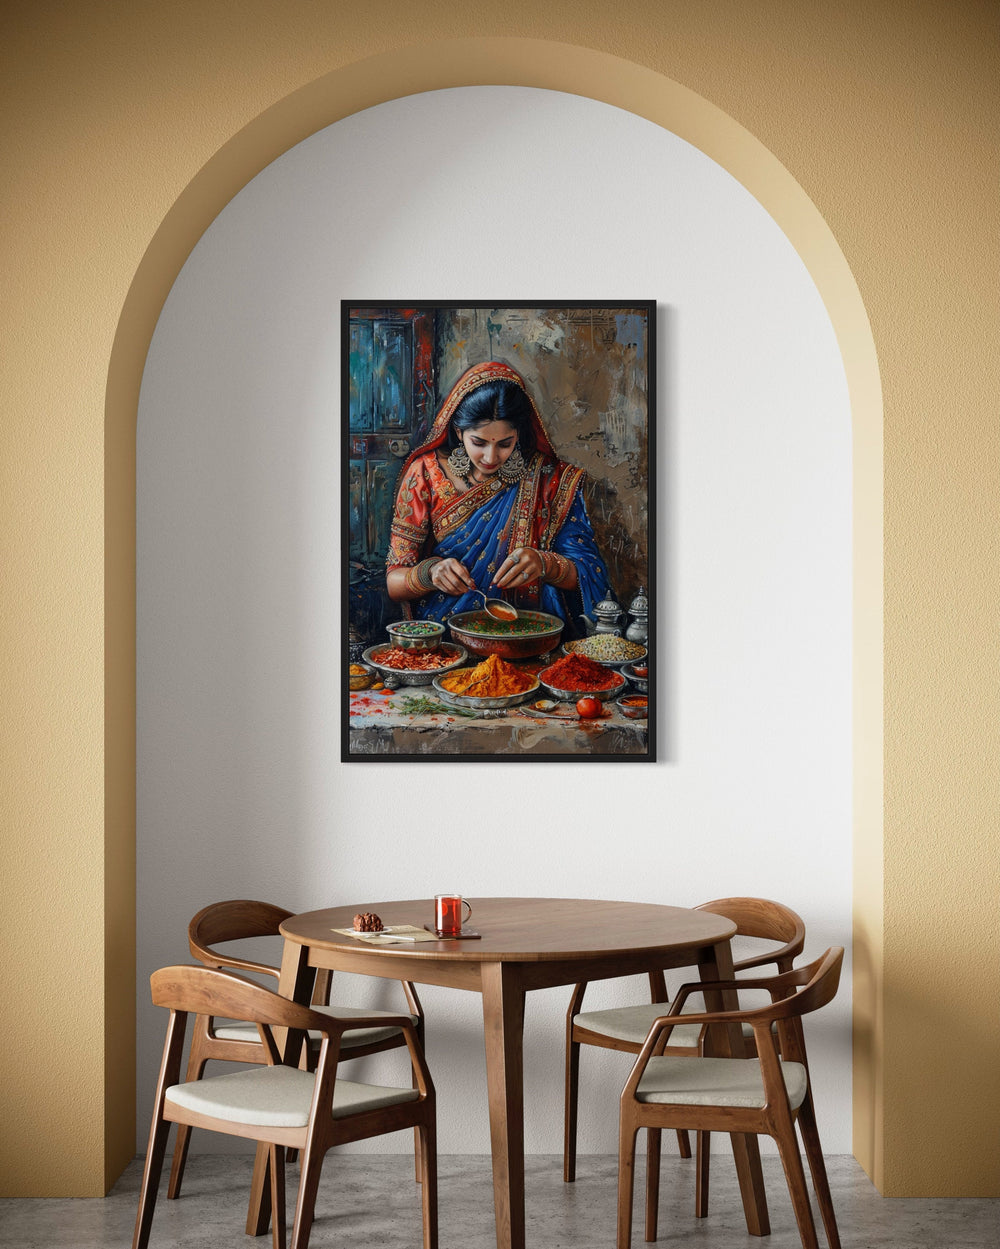 Indian Kitchen Wall Art - Indian Woman Cooking Painting Canvas Home Decor